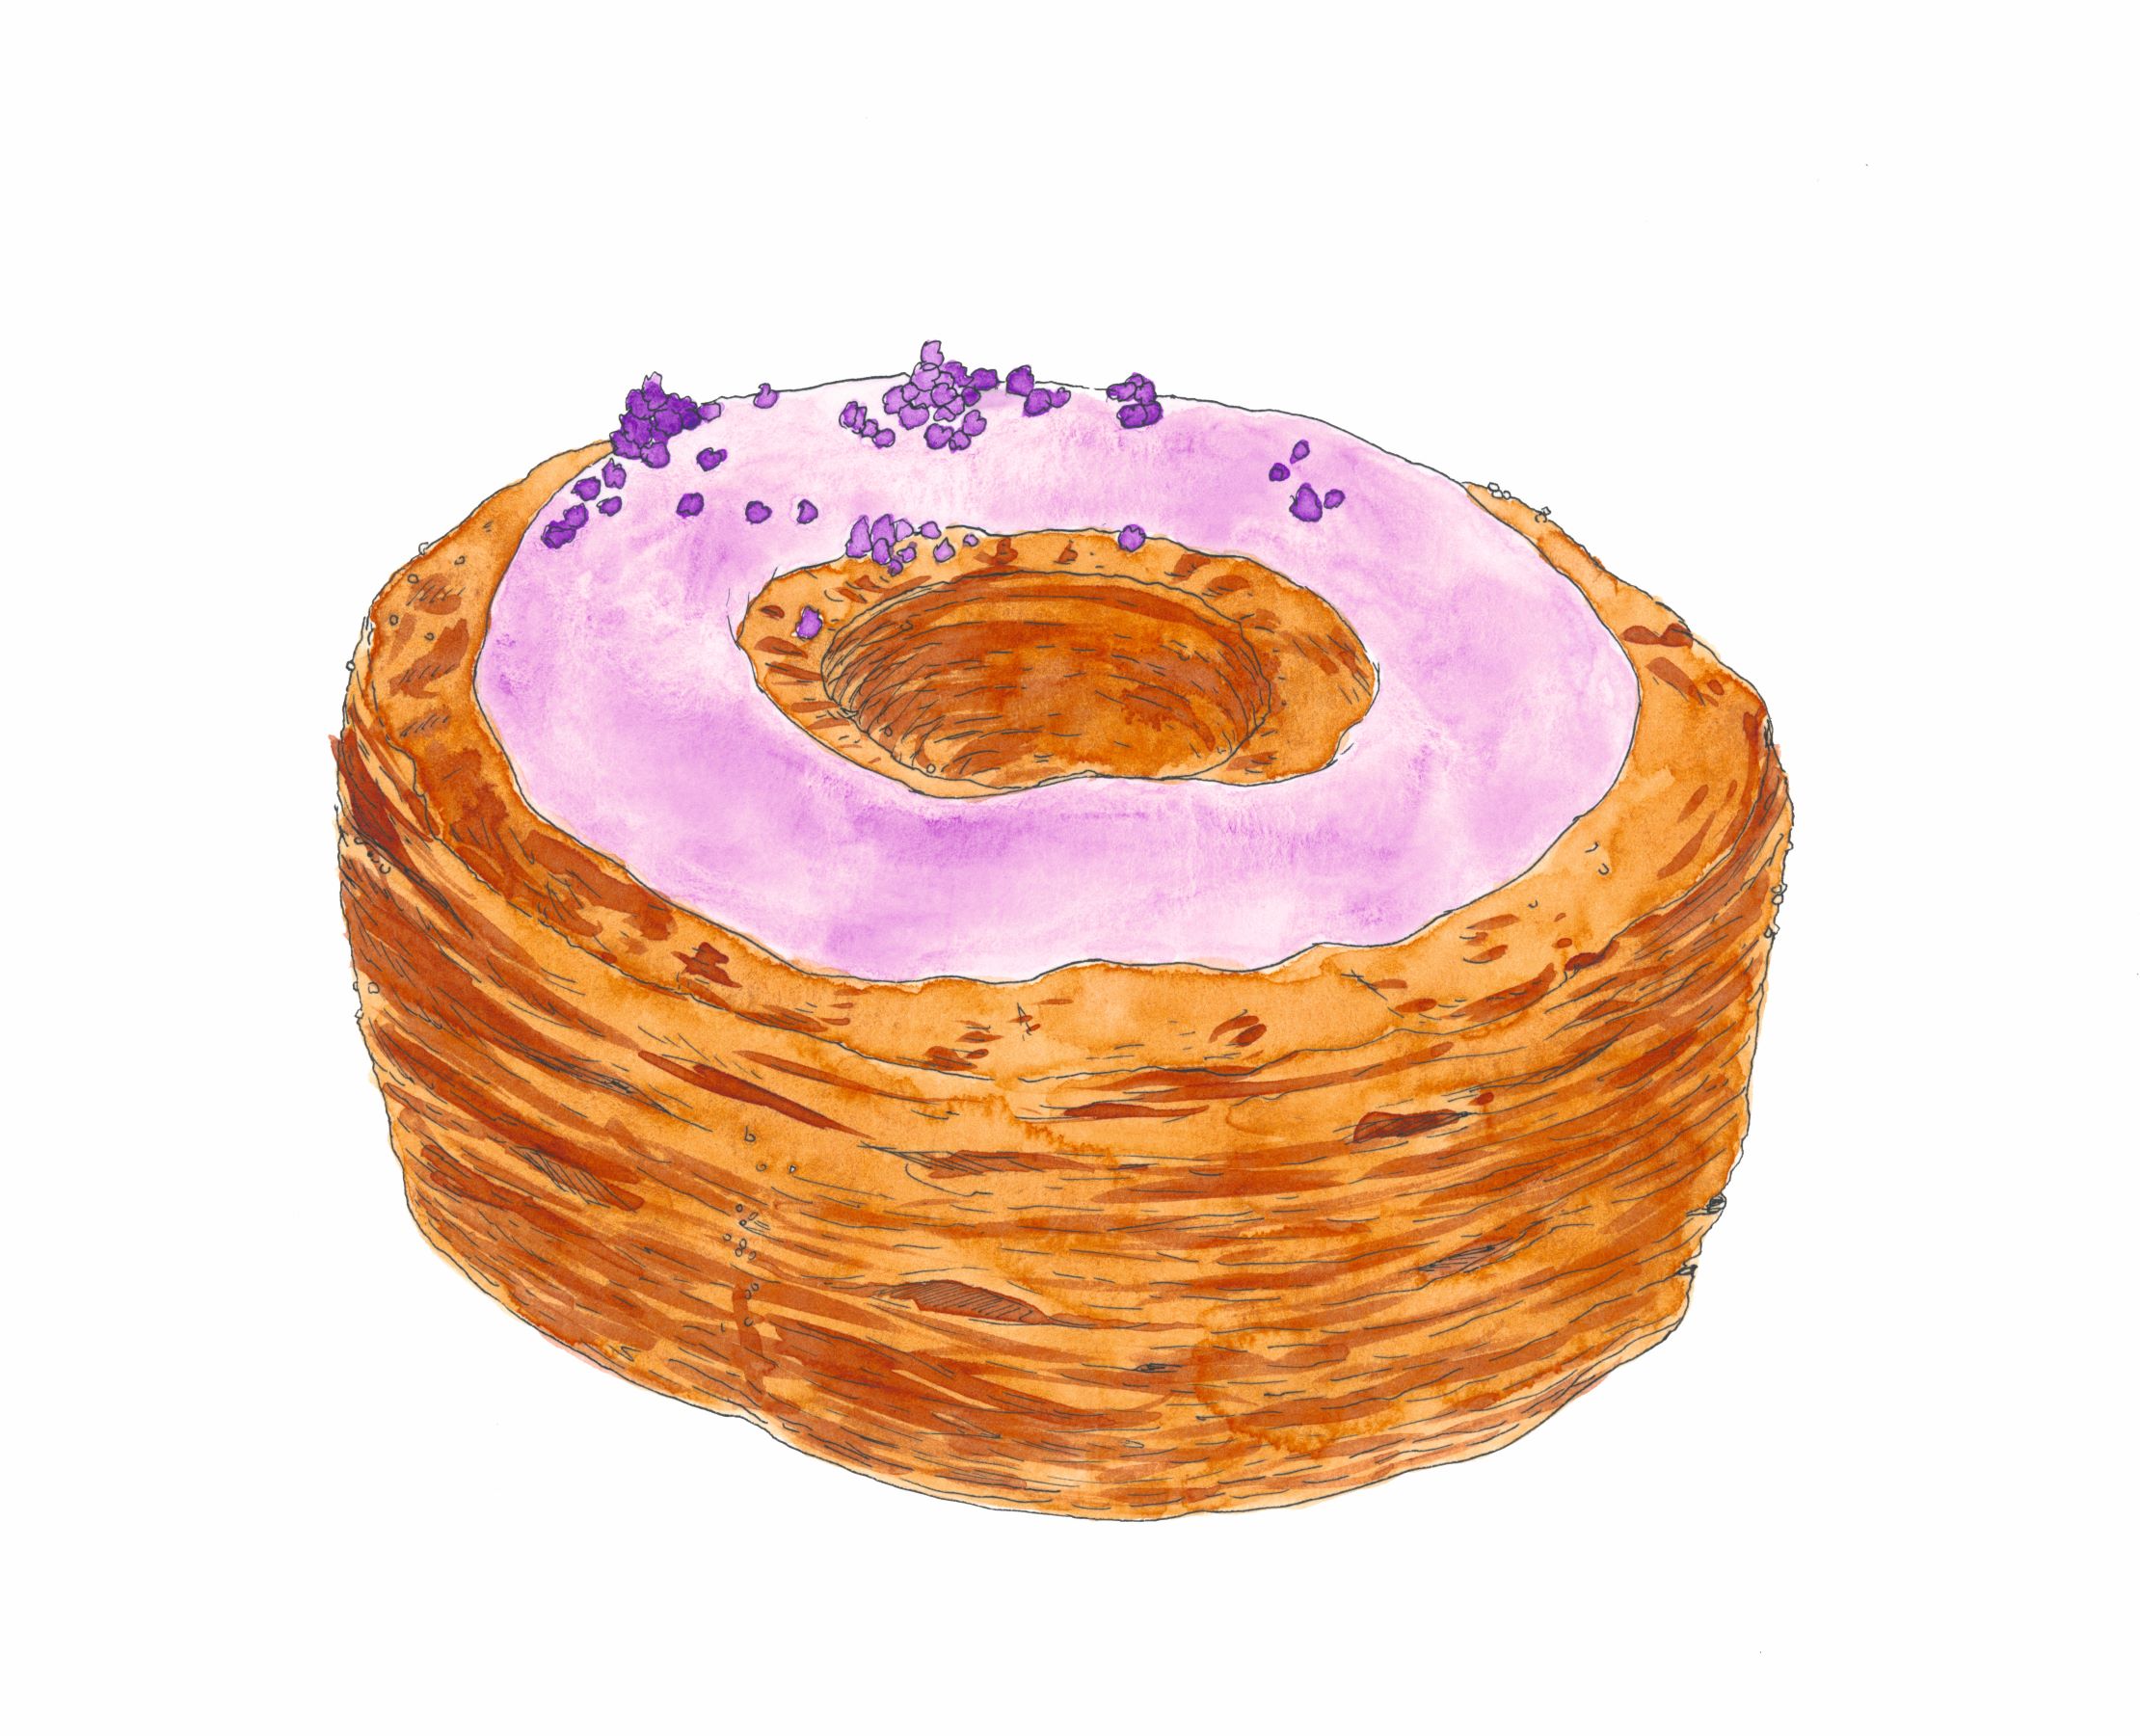 Cronut®, Dominique Ansel, Dominique Ansel Bakery, United States, 2013